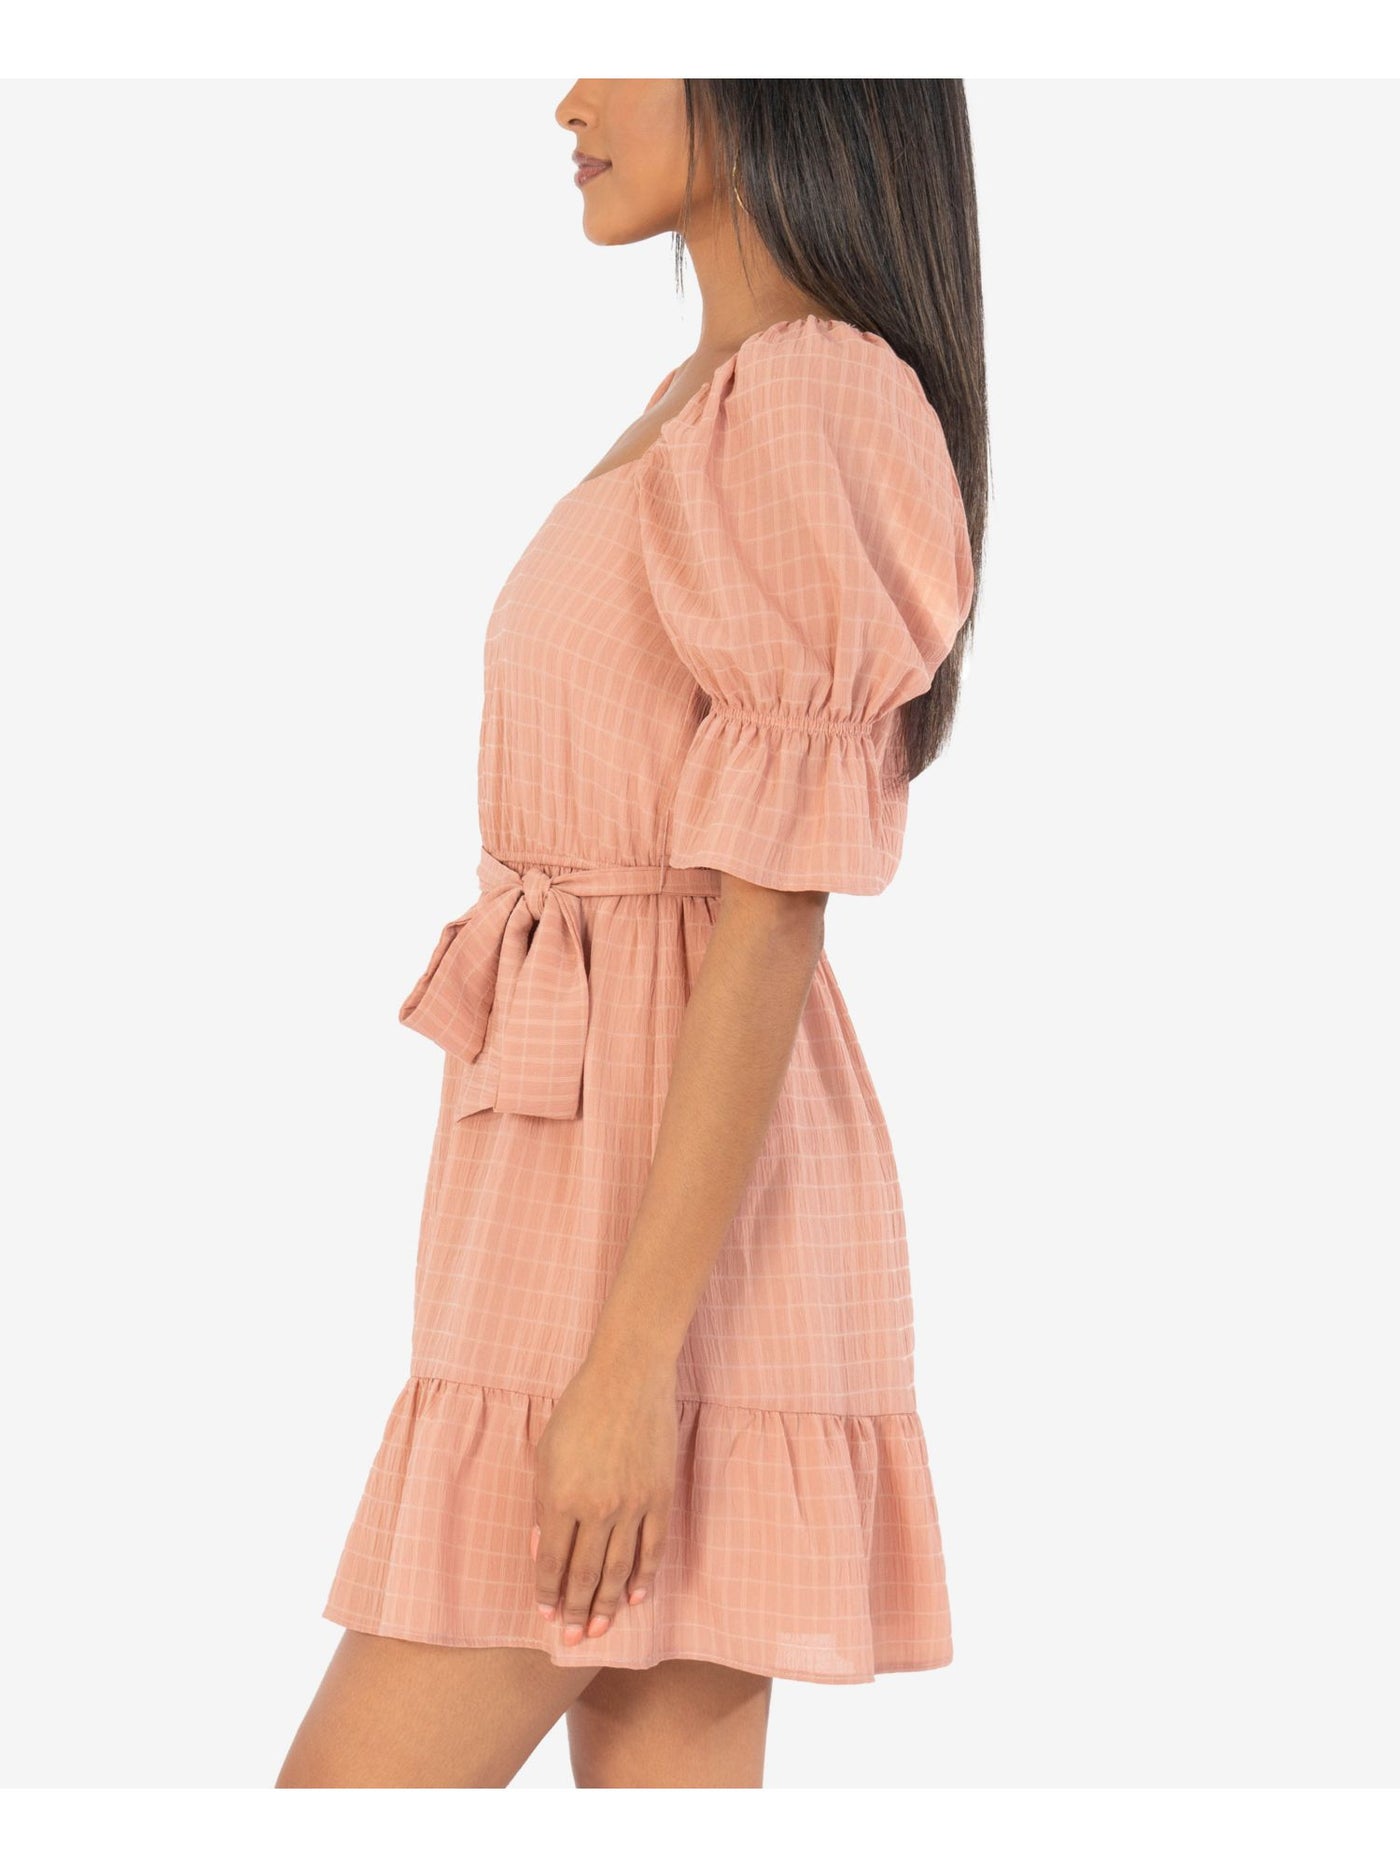 SPEECHLESS Womens Pink Stretch Ruffled Belted Semi-sheer Lined Pouf Sleeve Square Neck Mini Party Fit + Flare Dress Juniors L